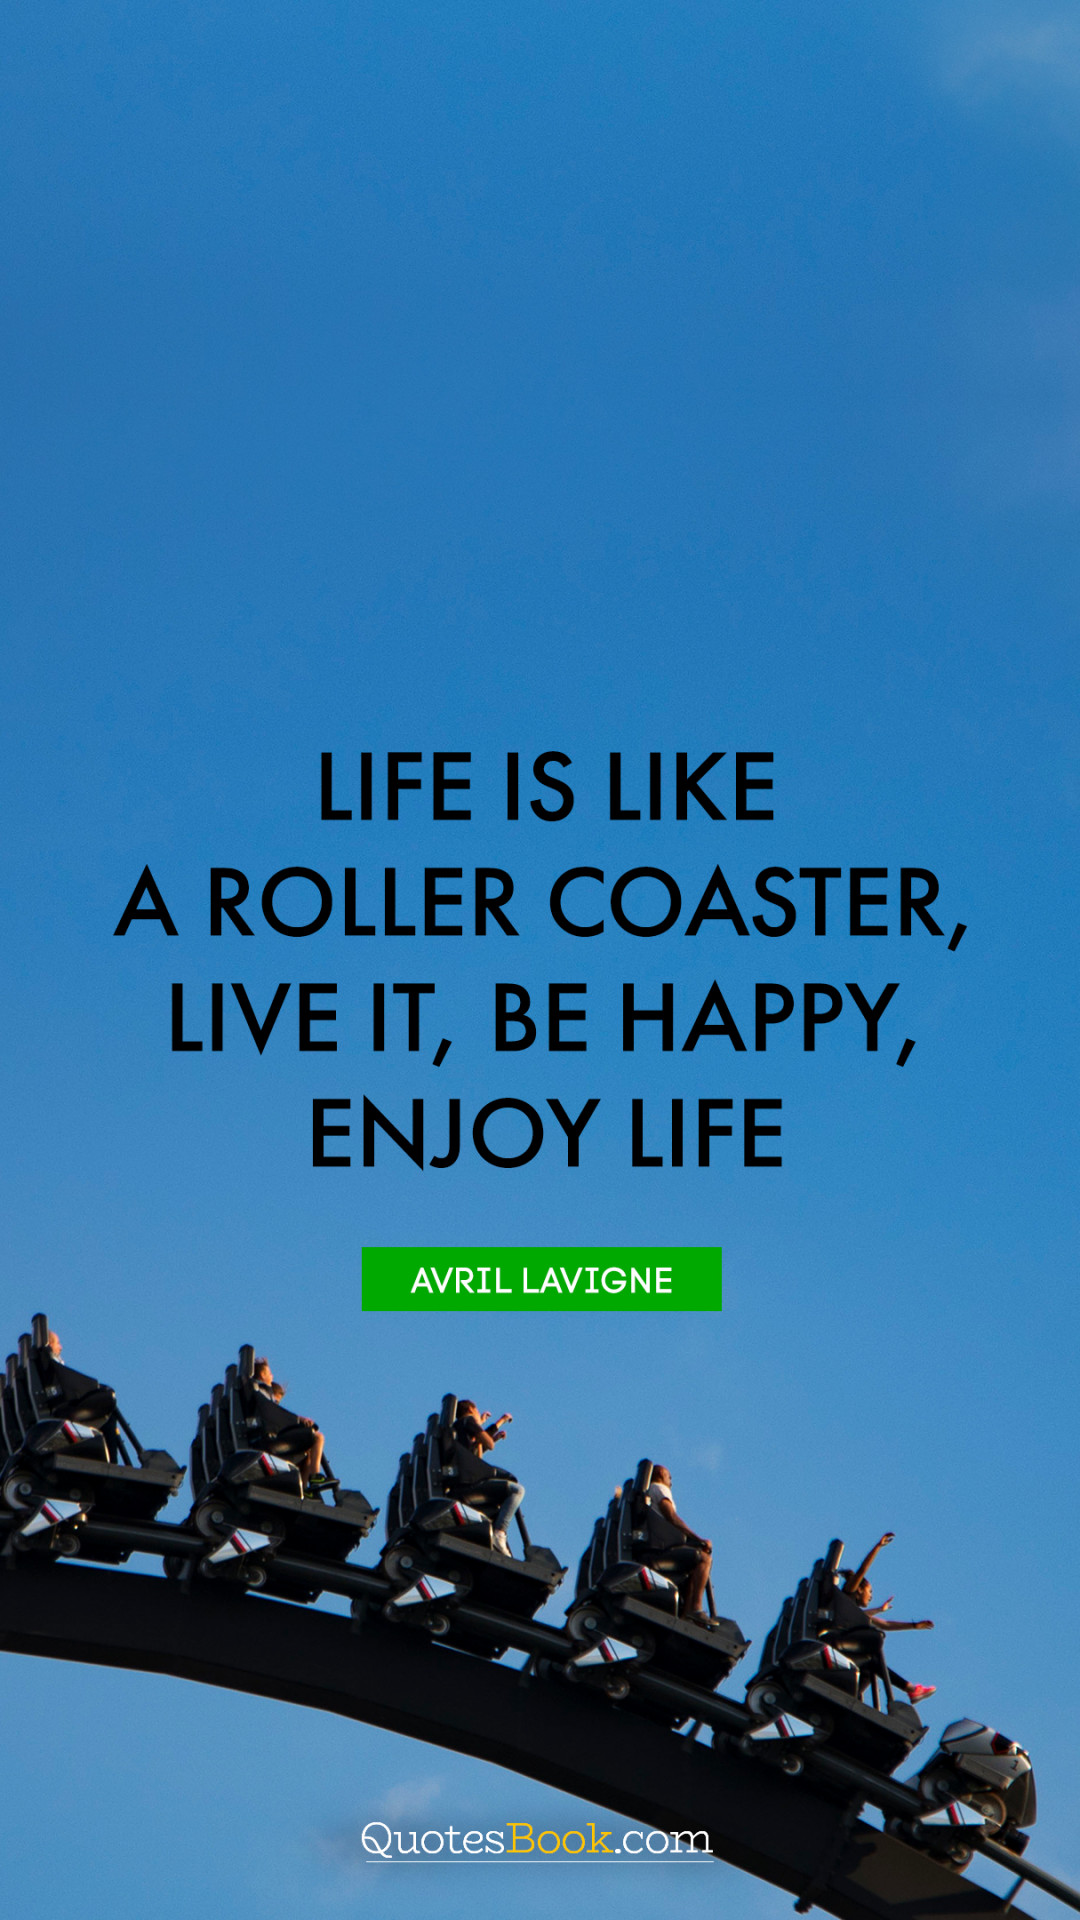 life is like a roller coaster live it be happy enjoy life 1080x1920 538